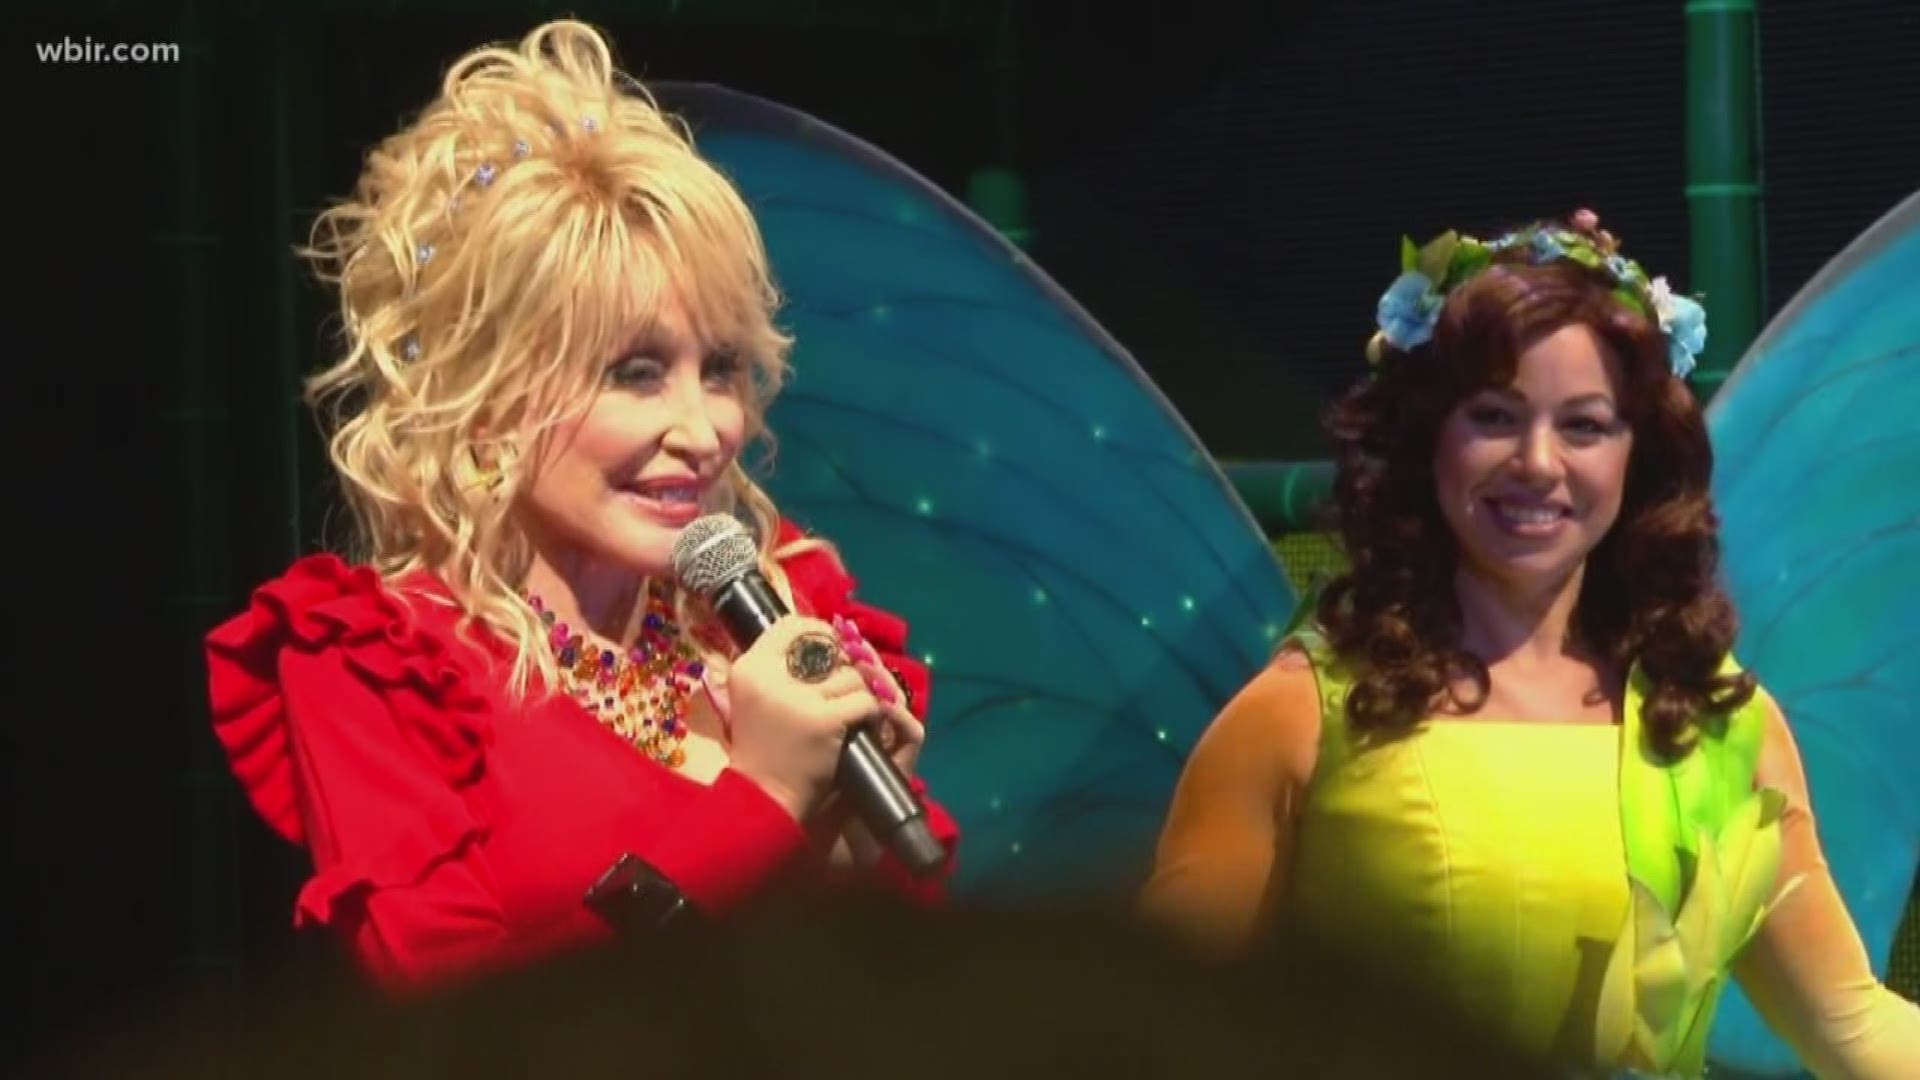 Dolly Parton herself was there to kick off the season and make a couple big announcements about the park.